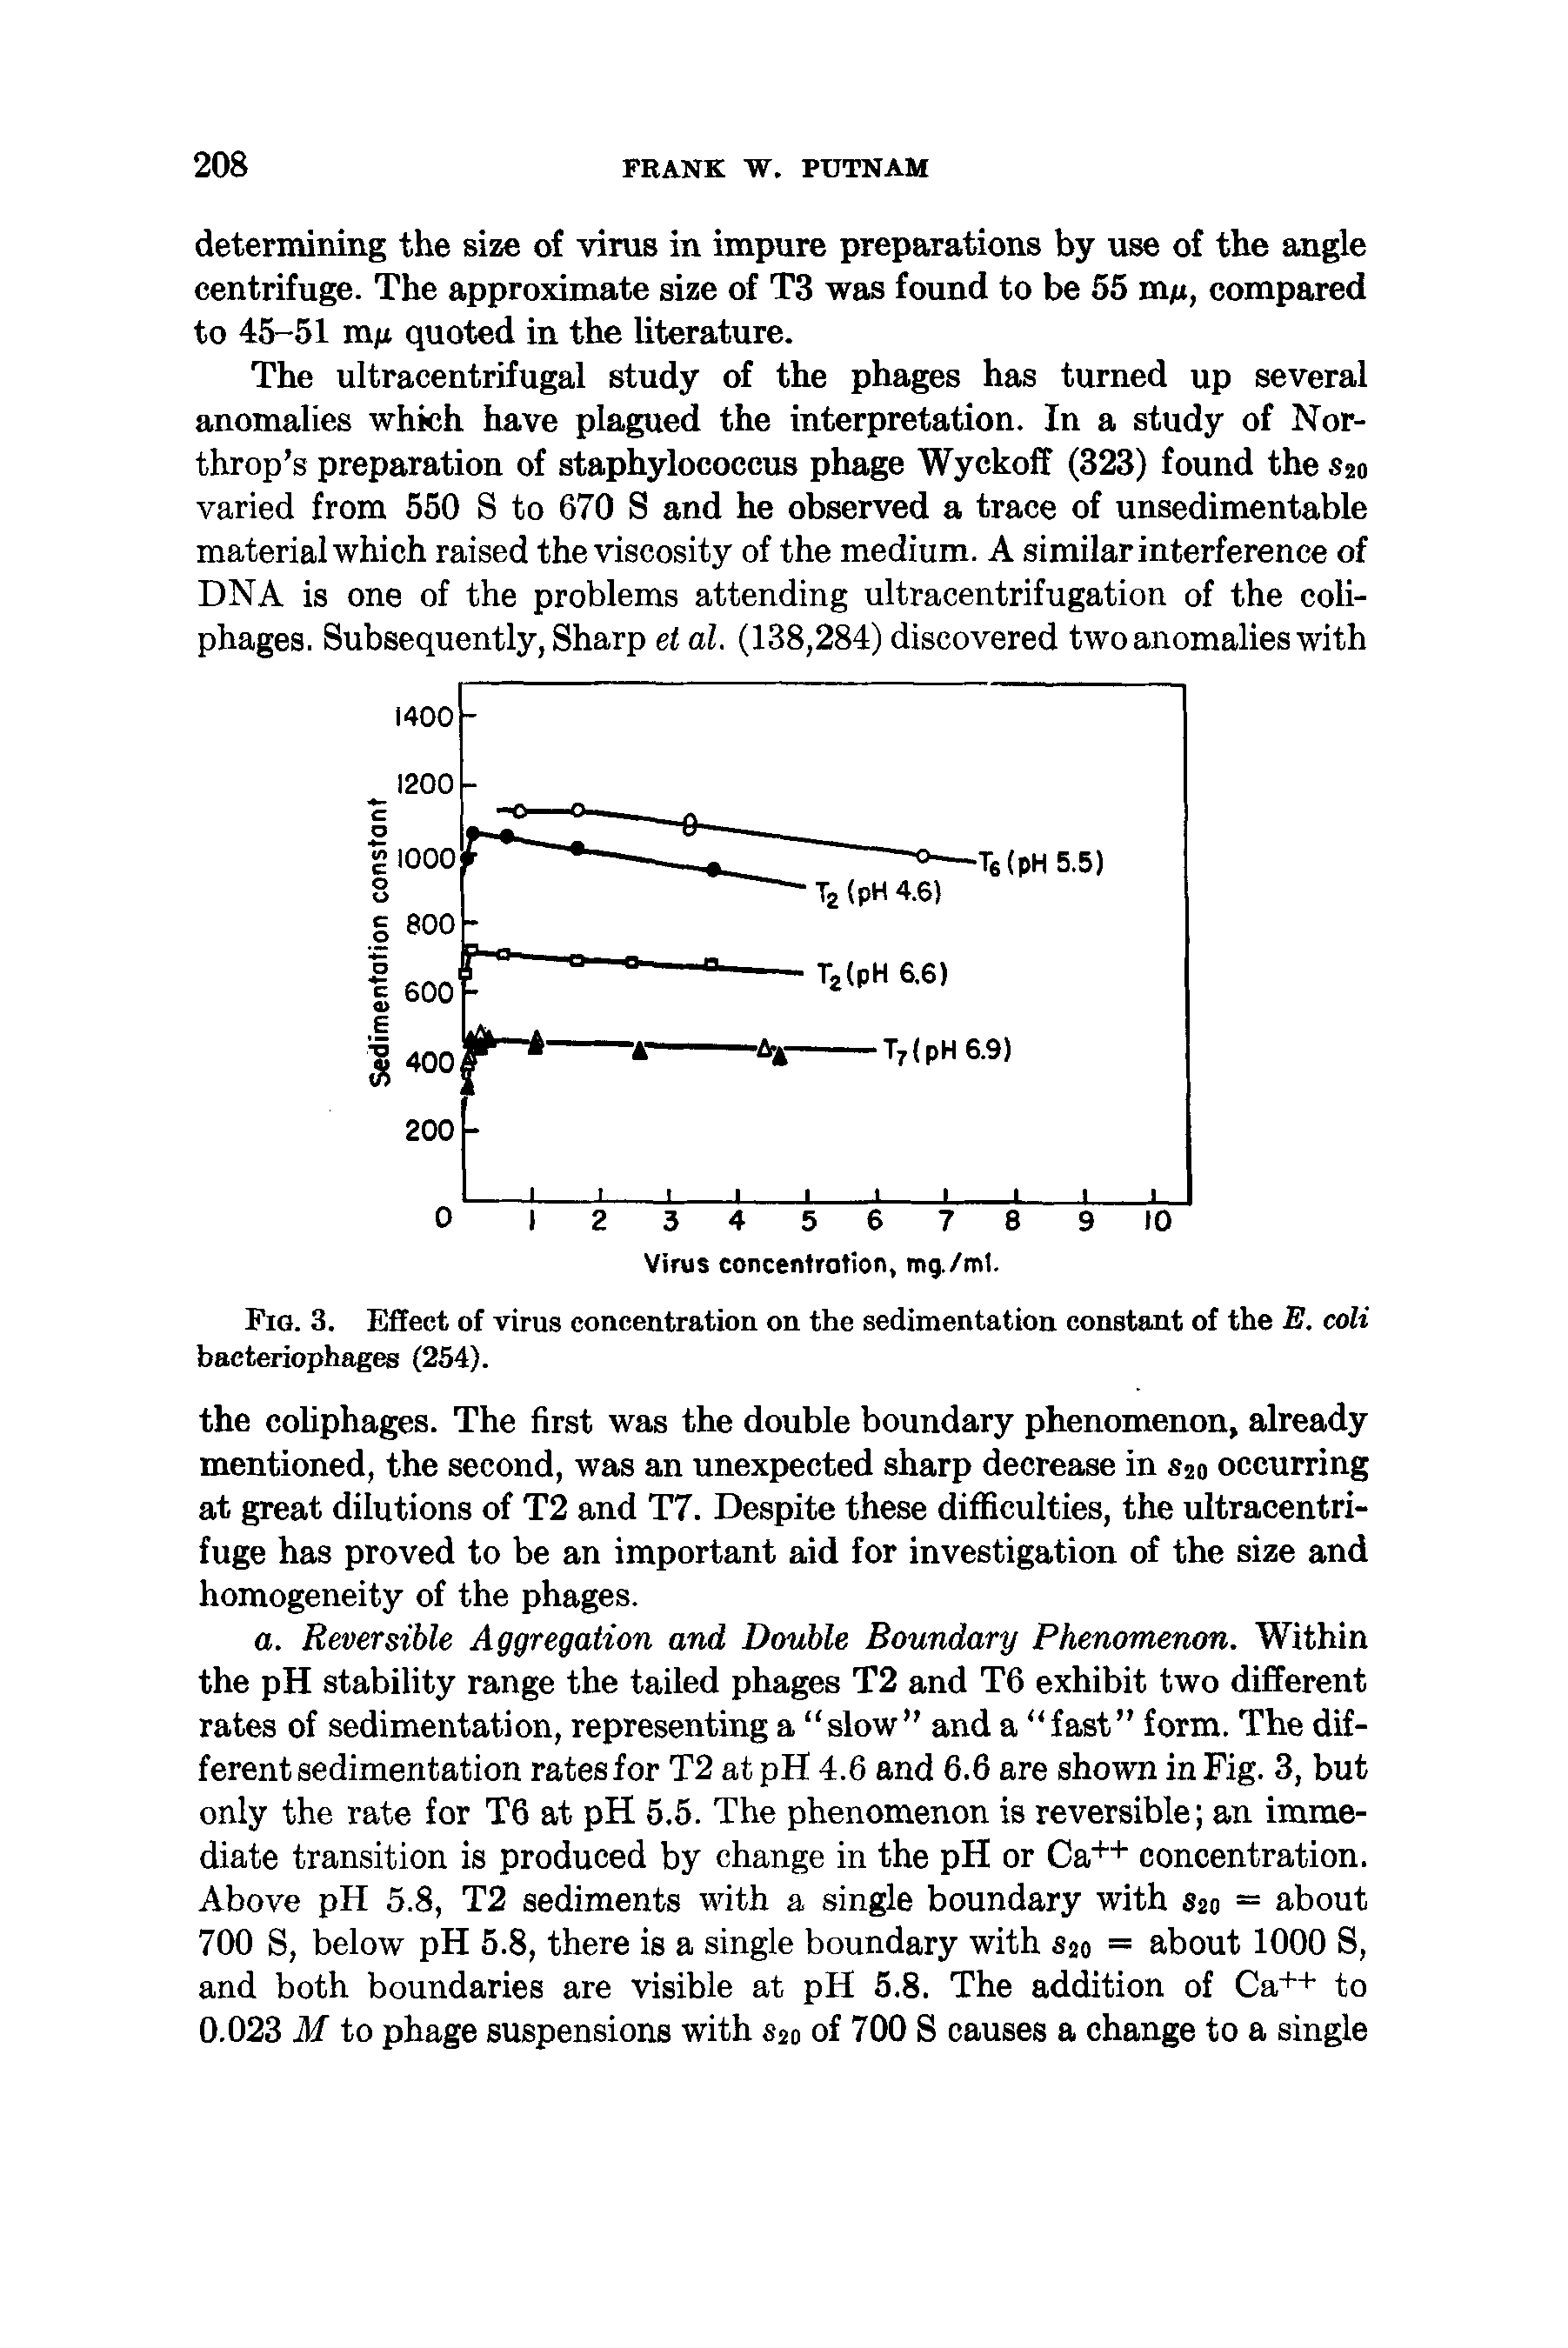 Fig. 3. Effect of virus concentration on the sedimentation constant of the E. colt bacteriophages (254).